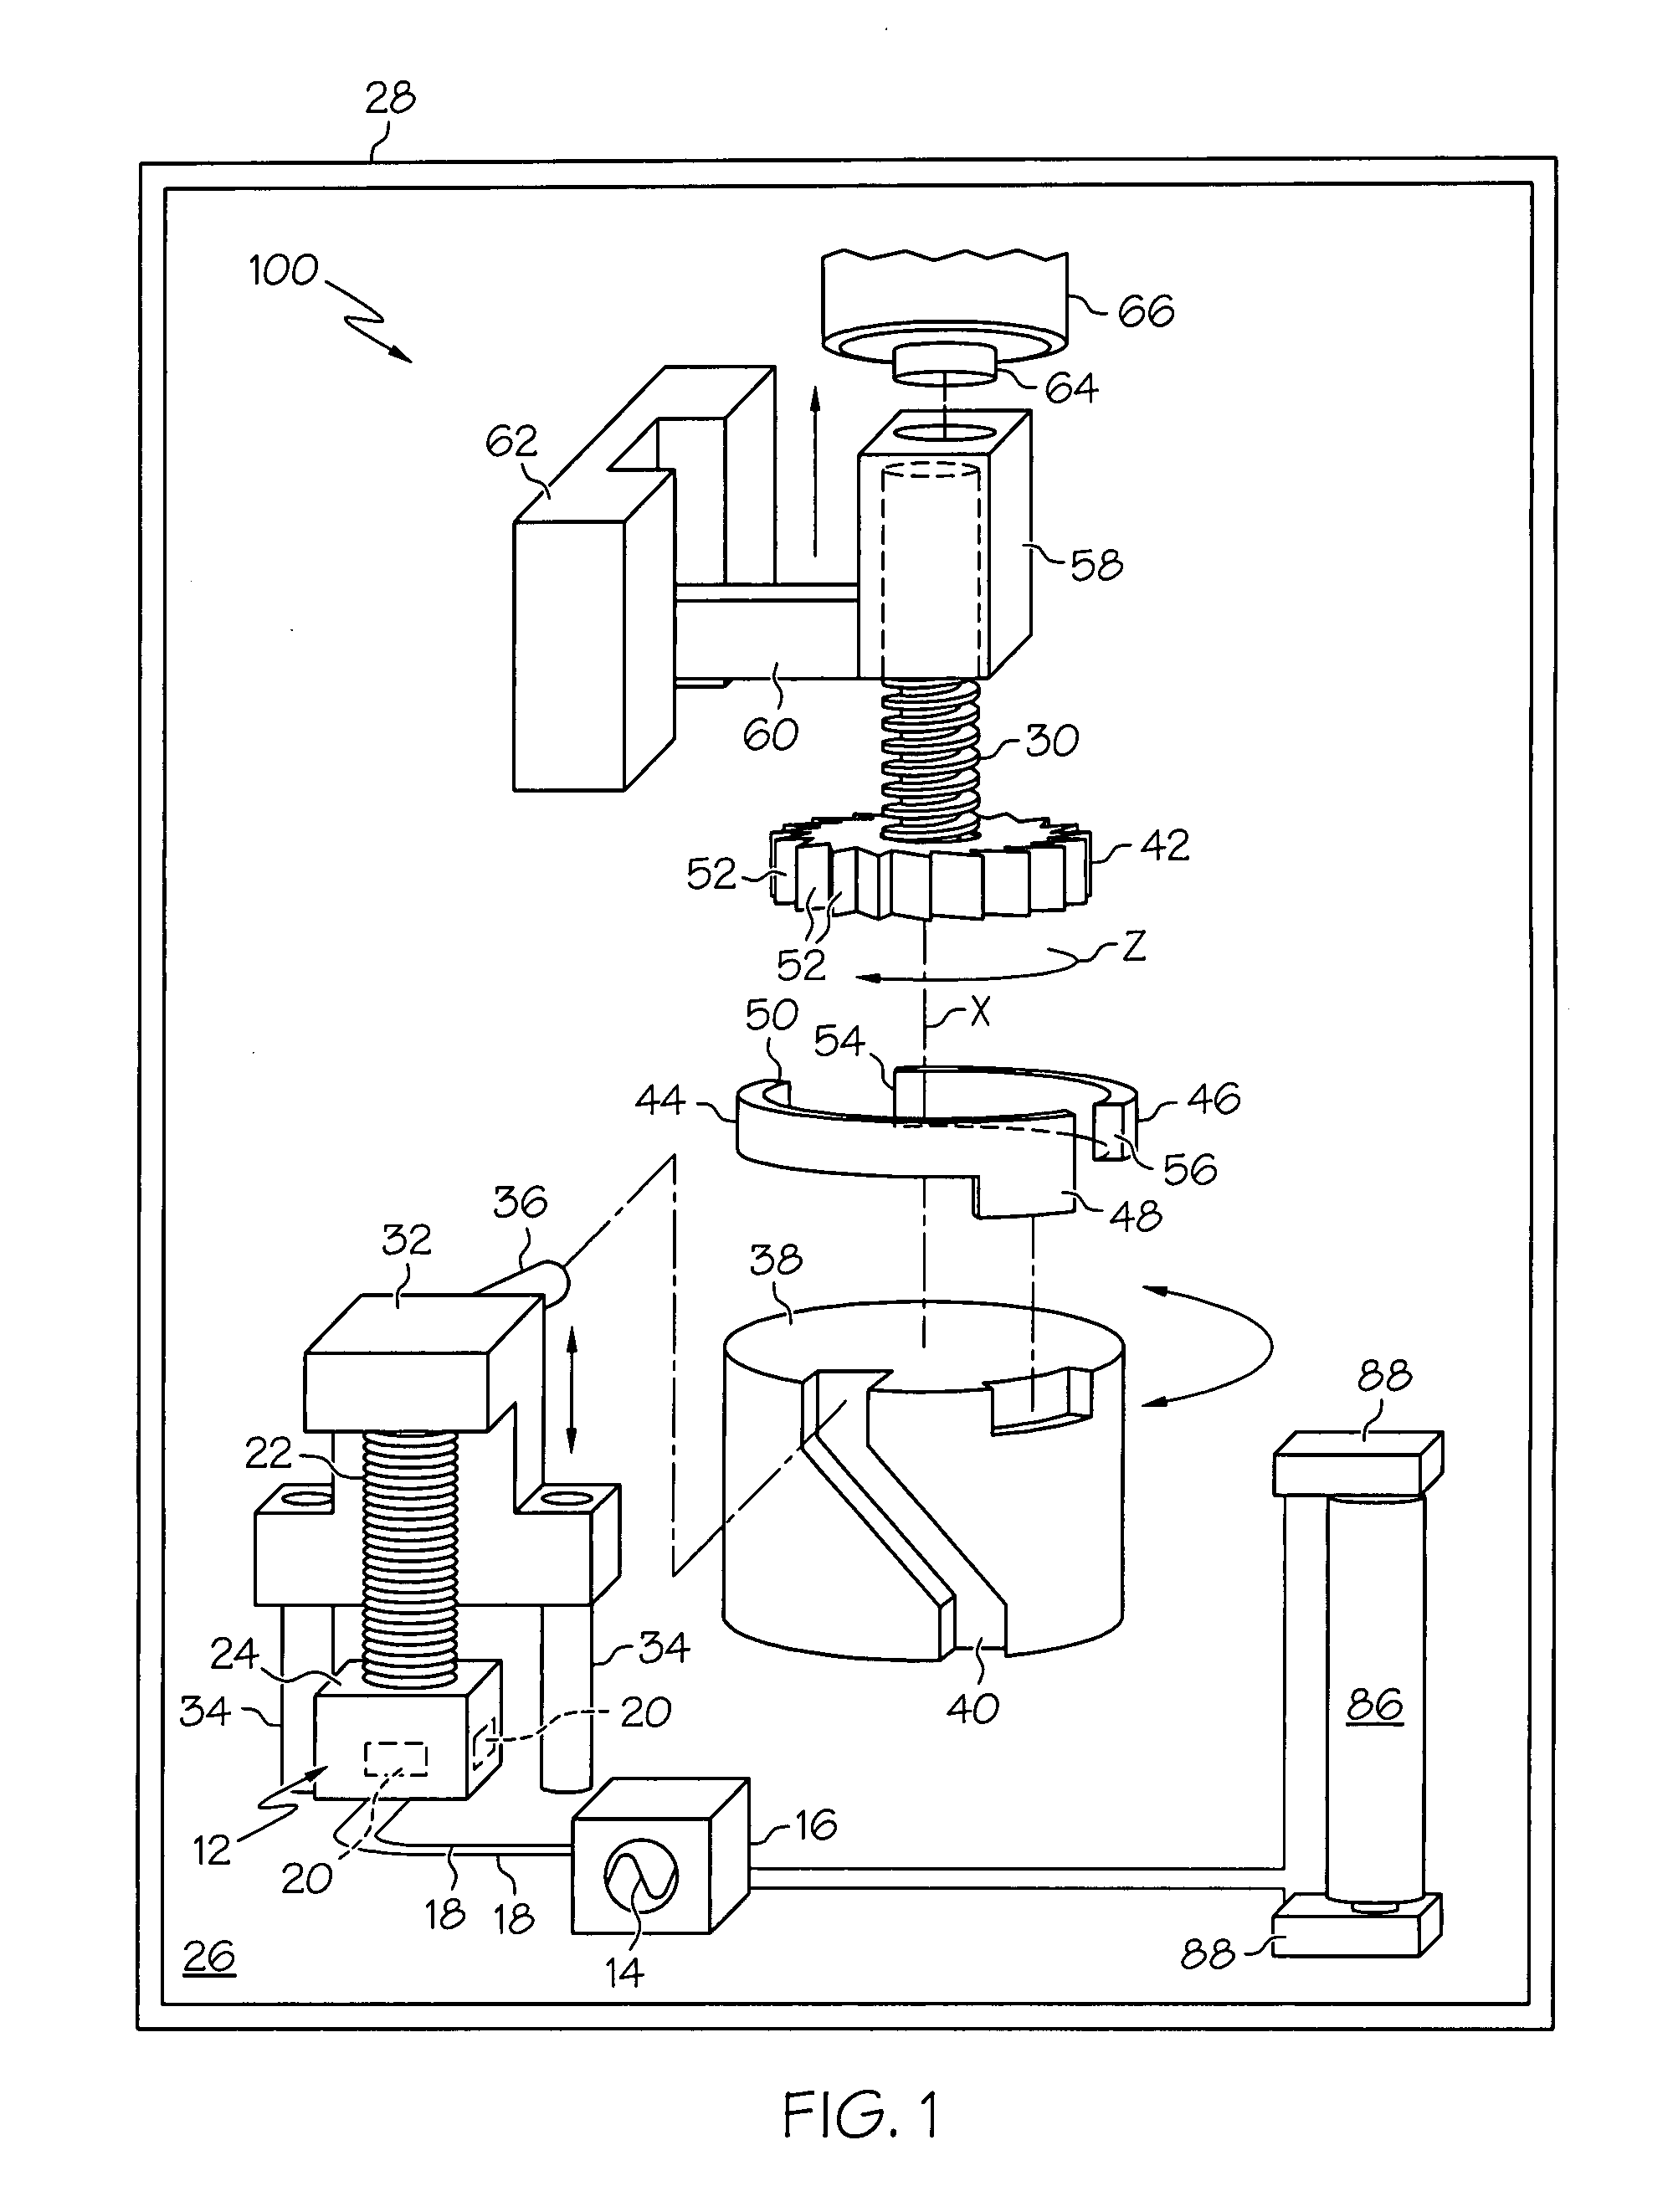 Drug delivery pump drive using linear piezoelectric motor